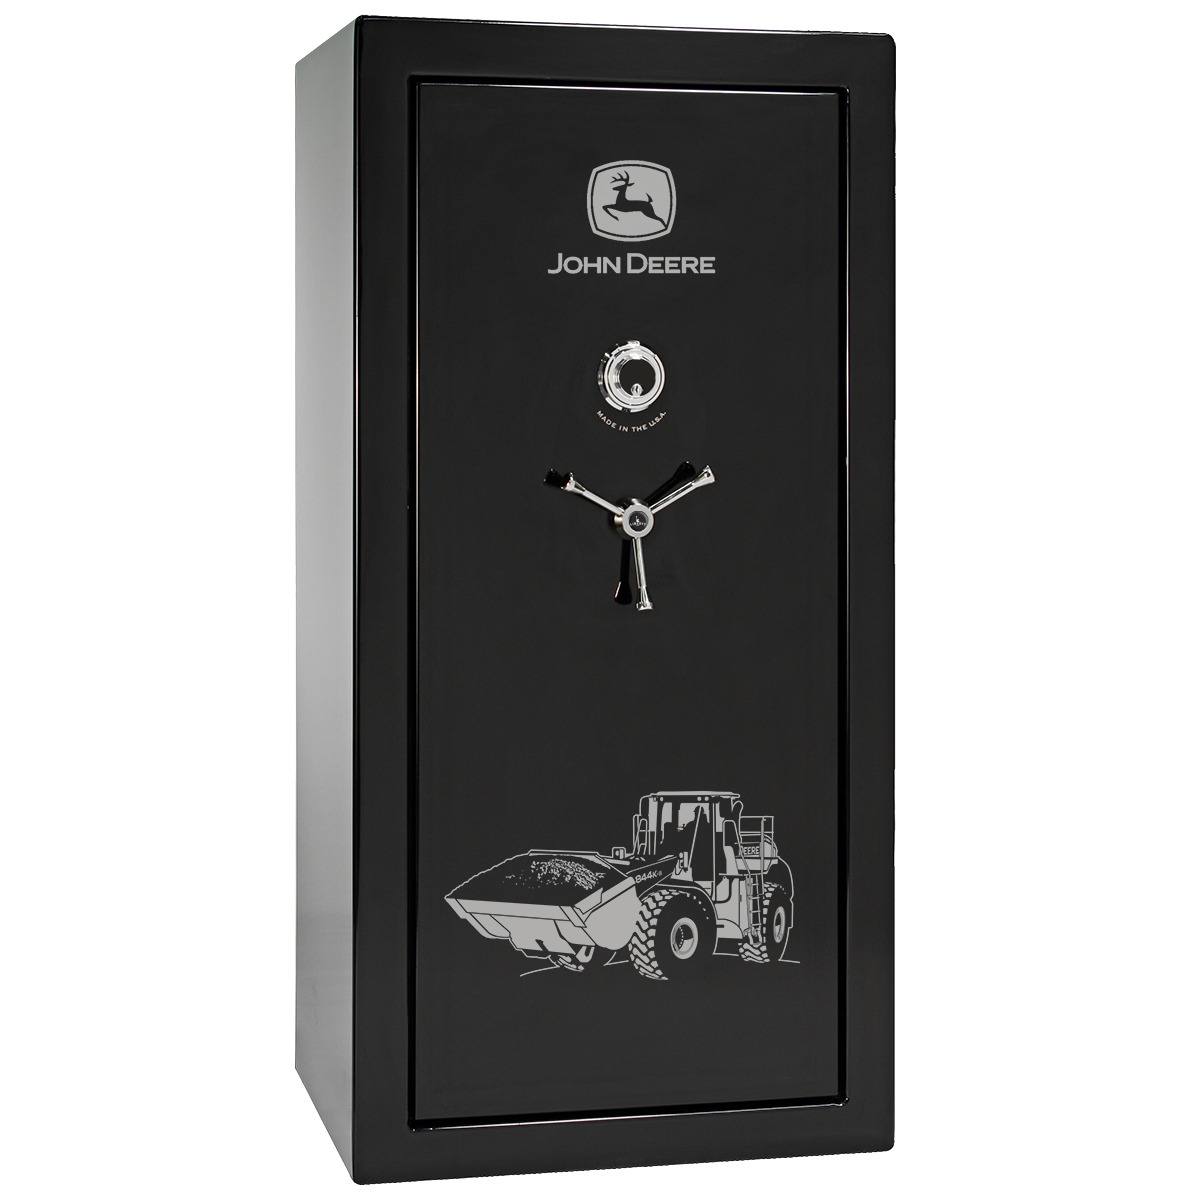 Specialty Series - 25 Gloss Black Security Safe